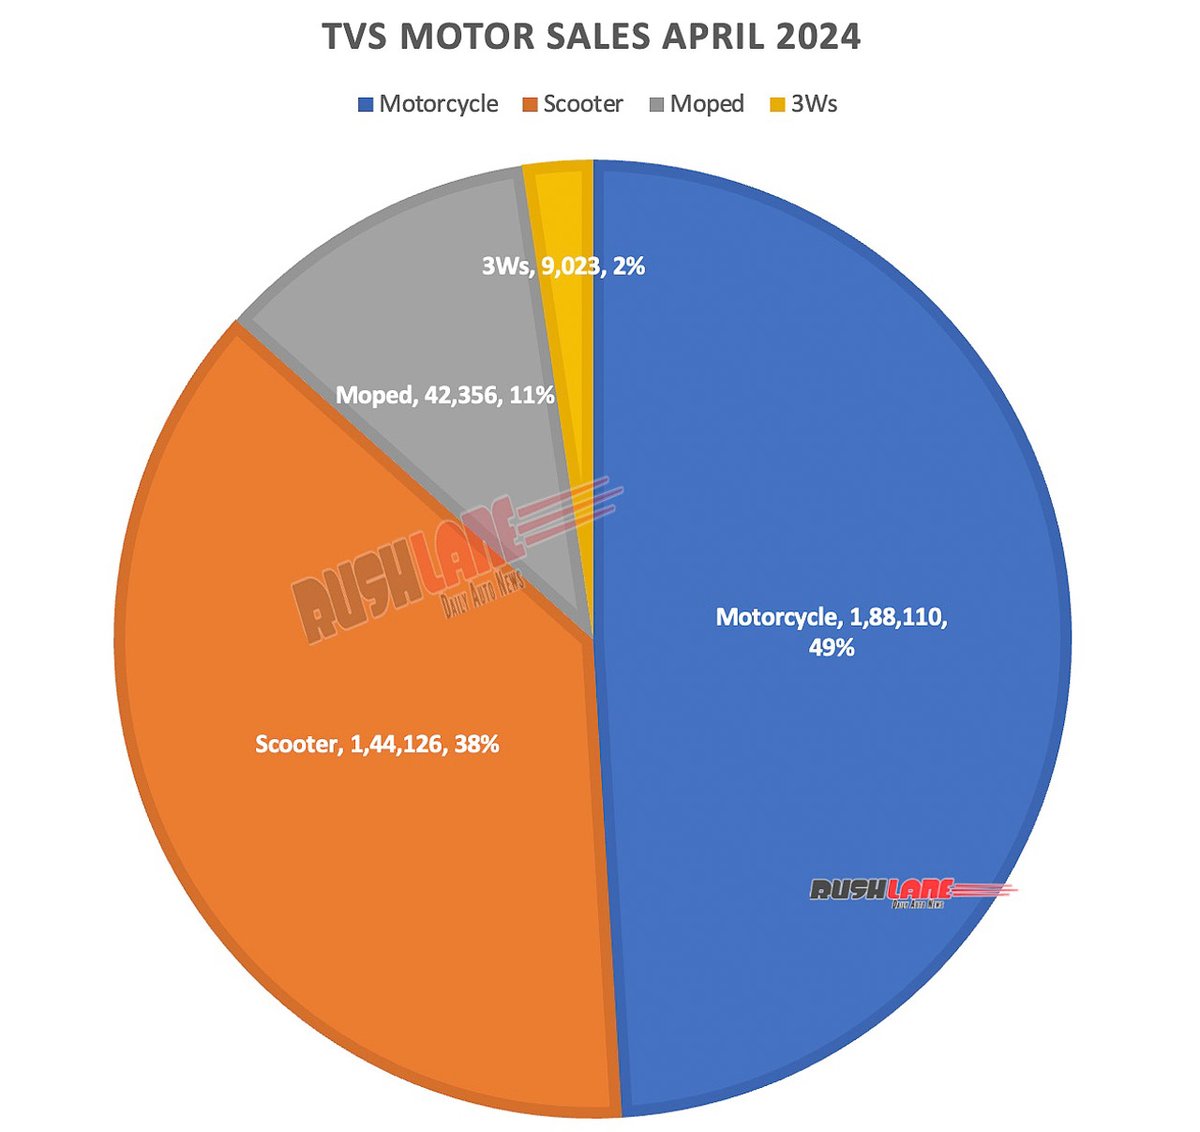 Breakup of TVS Motor Sales + Exports for April 2024

Motorcycles - 1.88 lakh 
Scooters - 1.44 lakh
Moped - 42k
3Ws - 9k

Total - 3.83 lakh